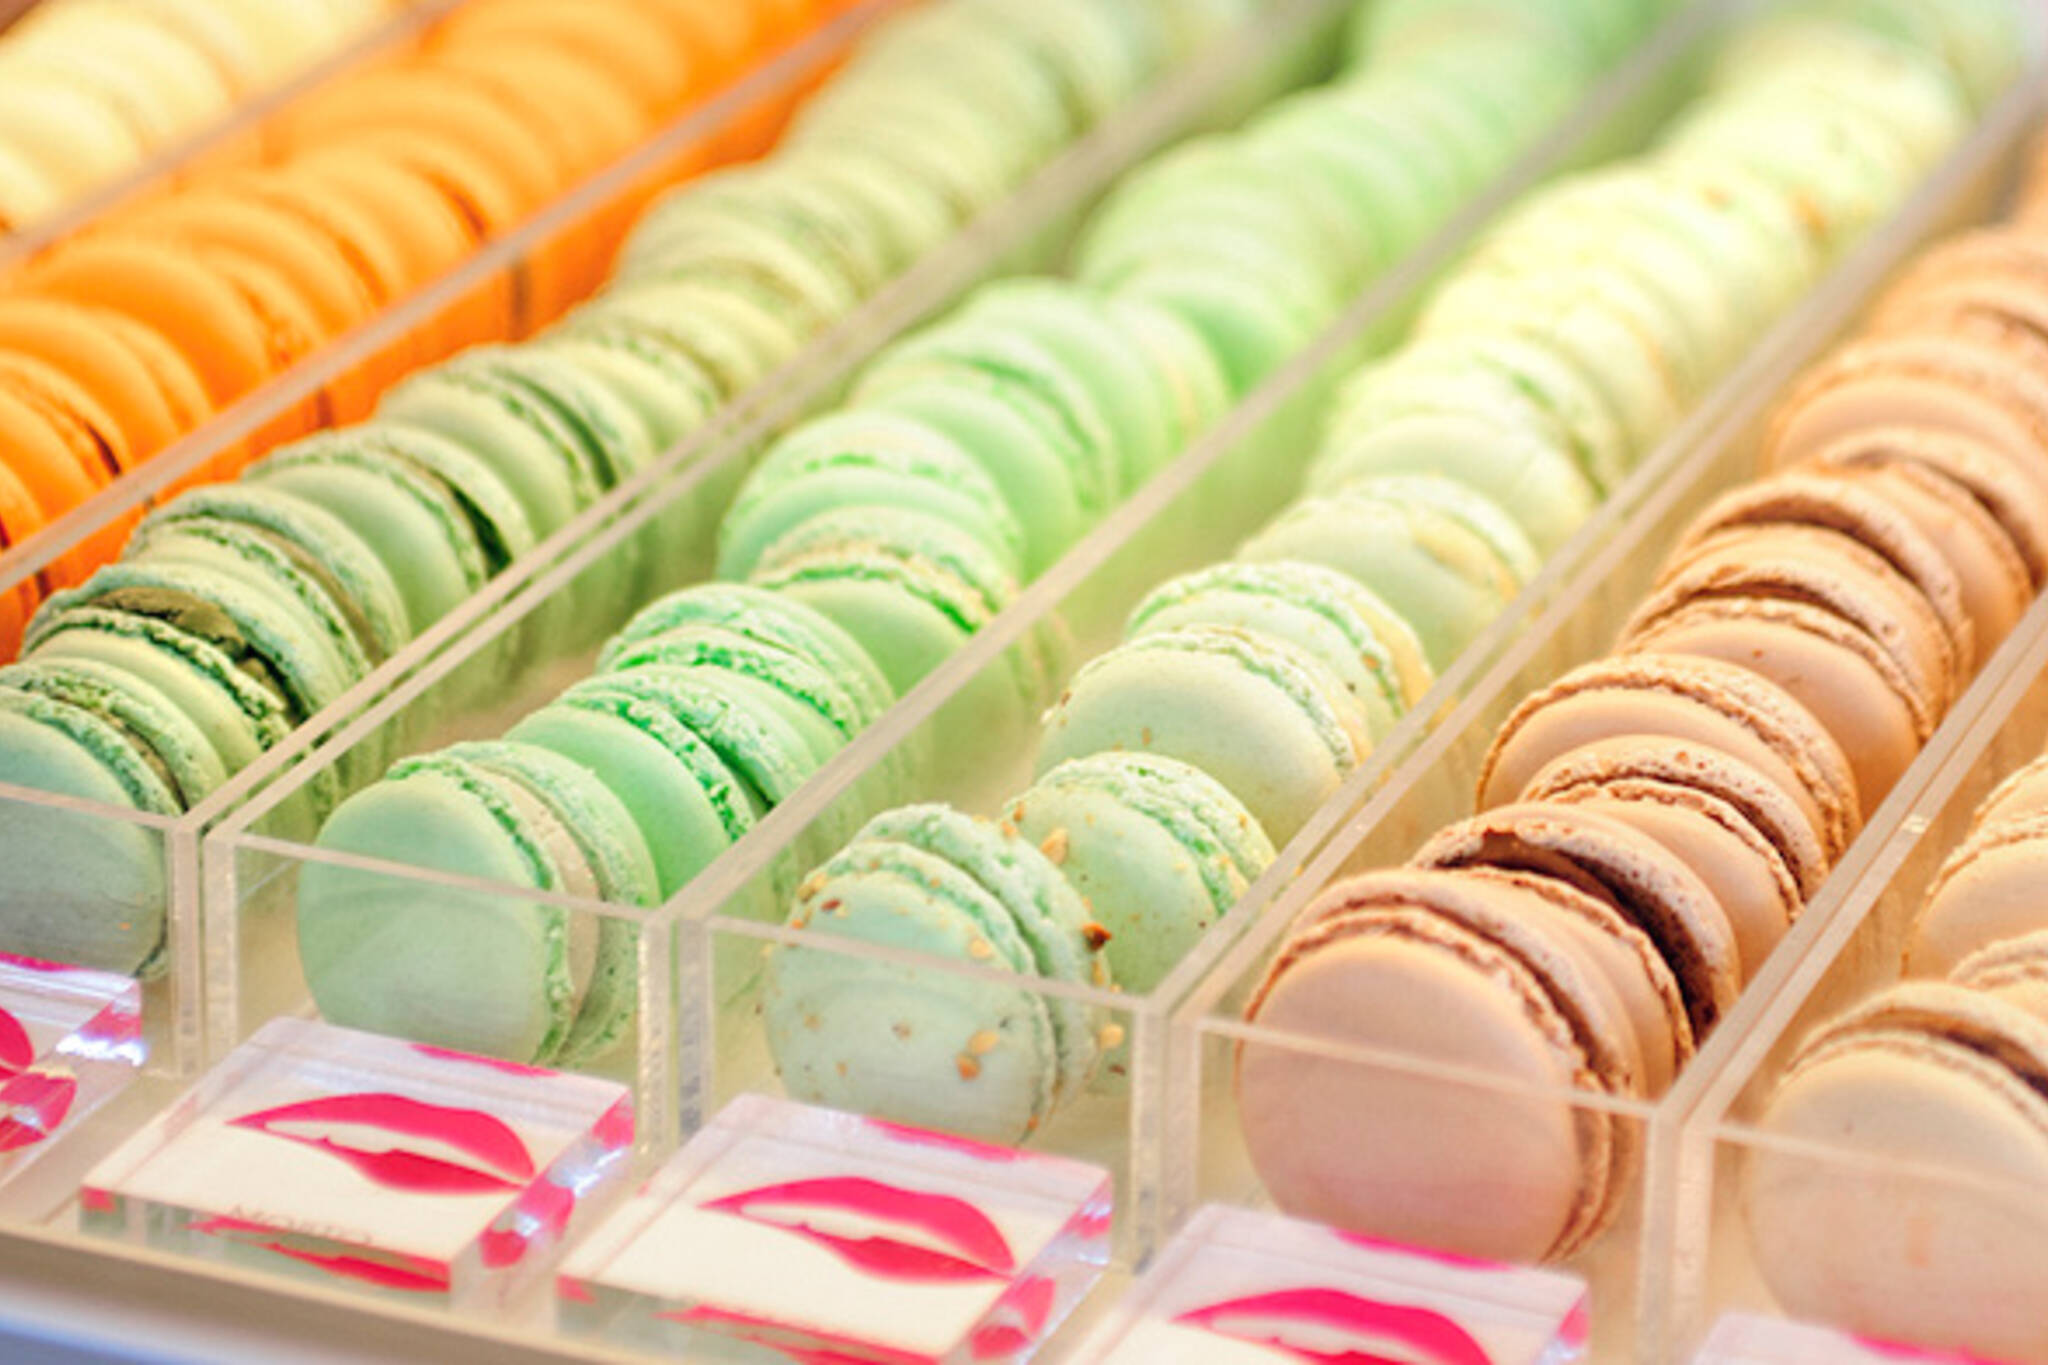 The top 10 places to celebrate Macaron Day in Toronto